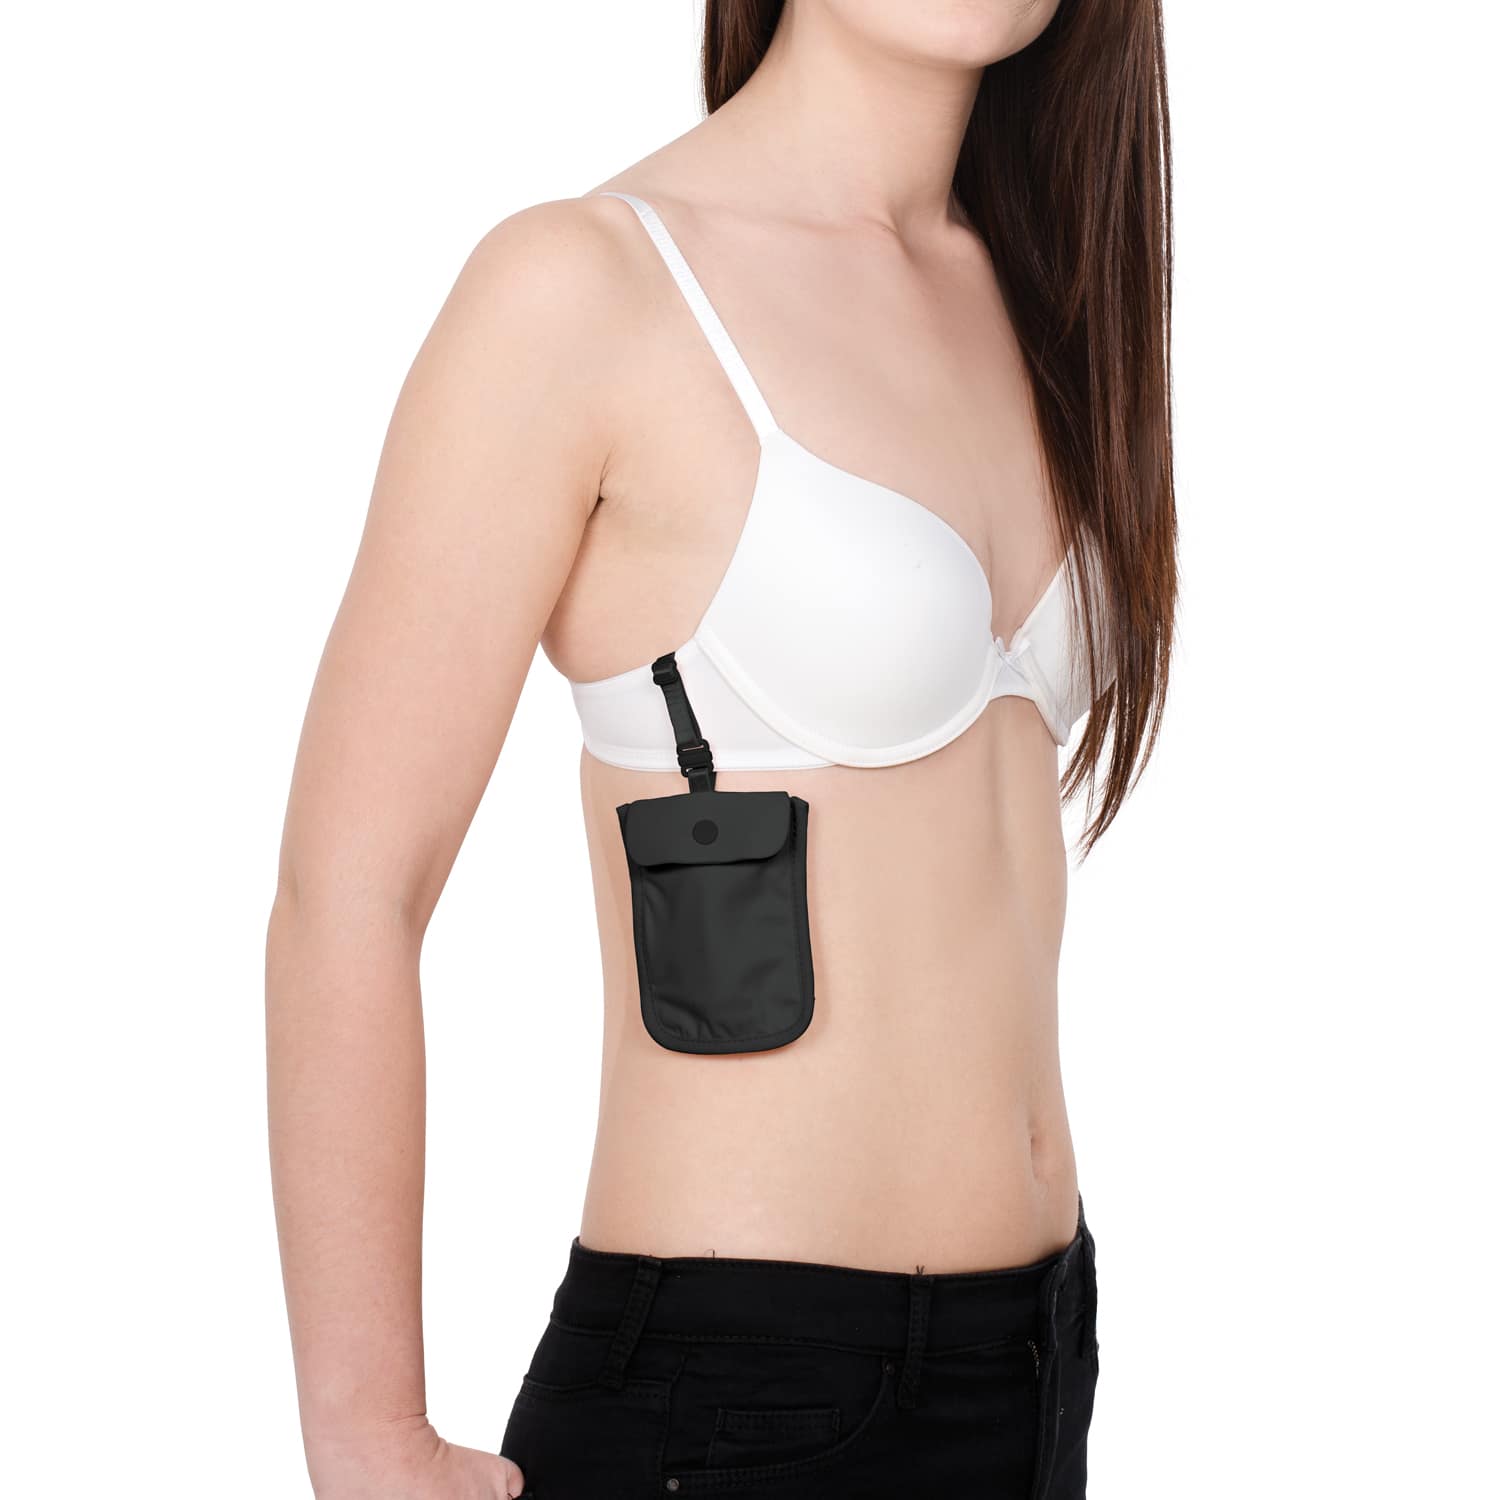 The Ultra-Light Travel Bra with Pockets - Nude